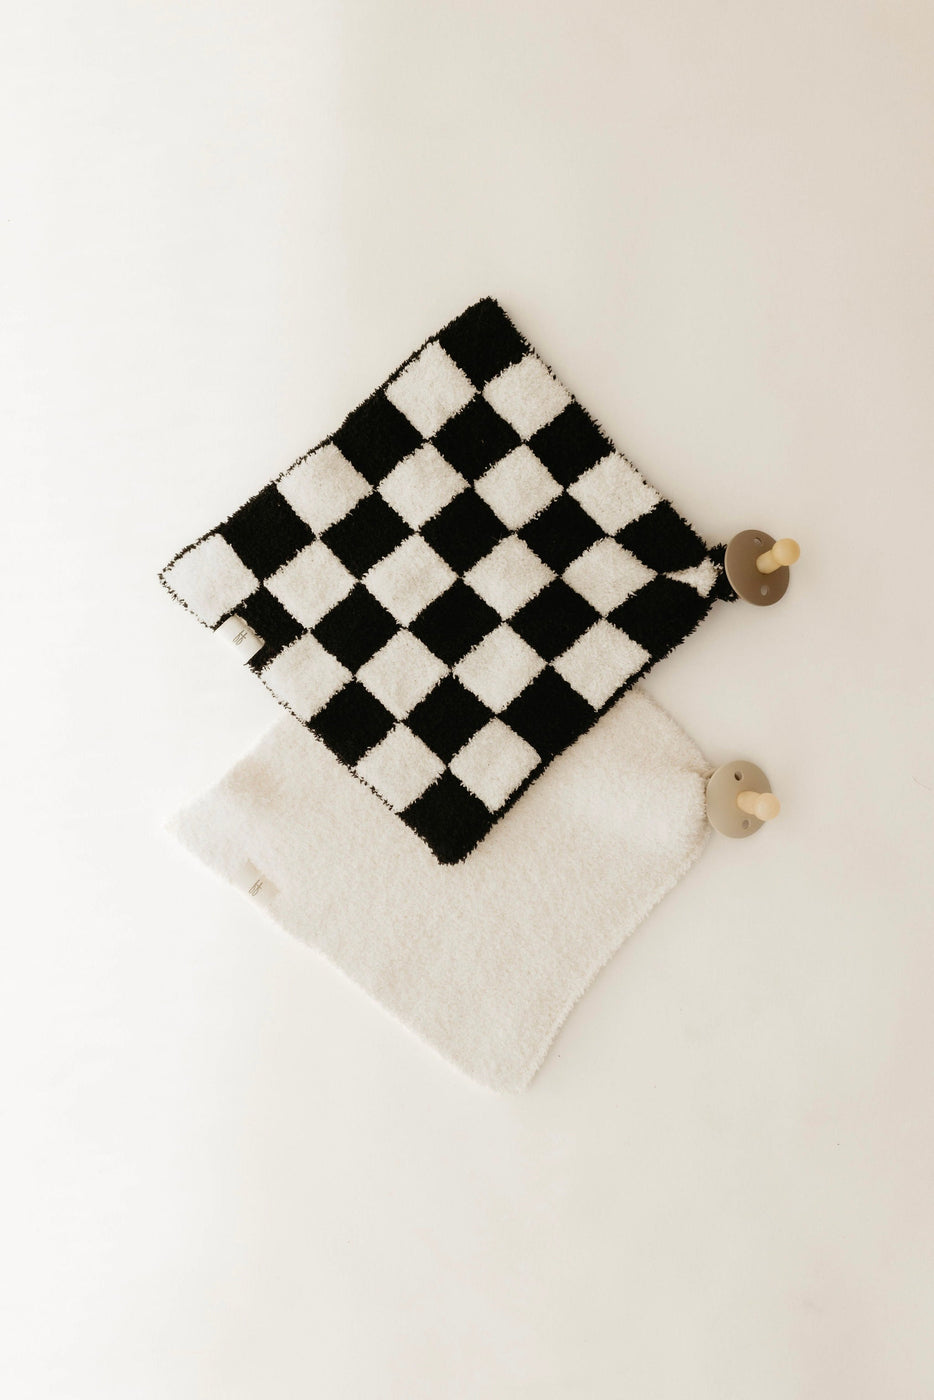 a black and white checkered towel